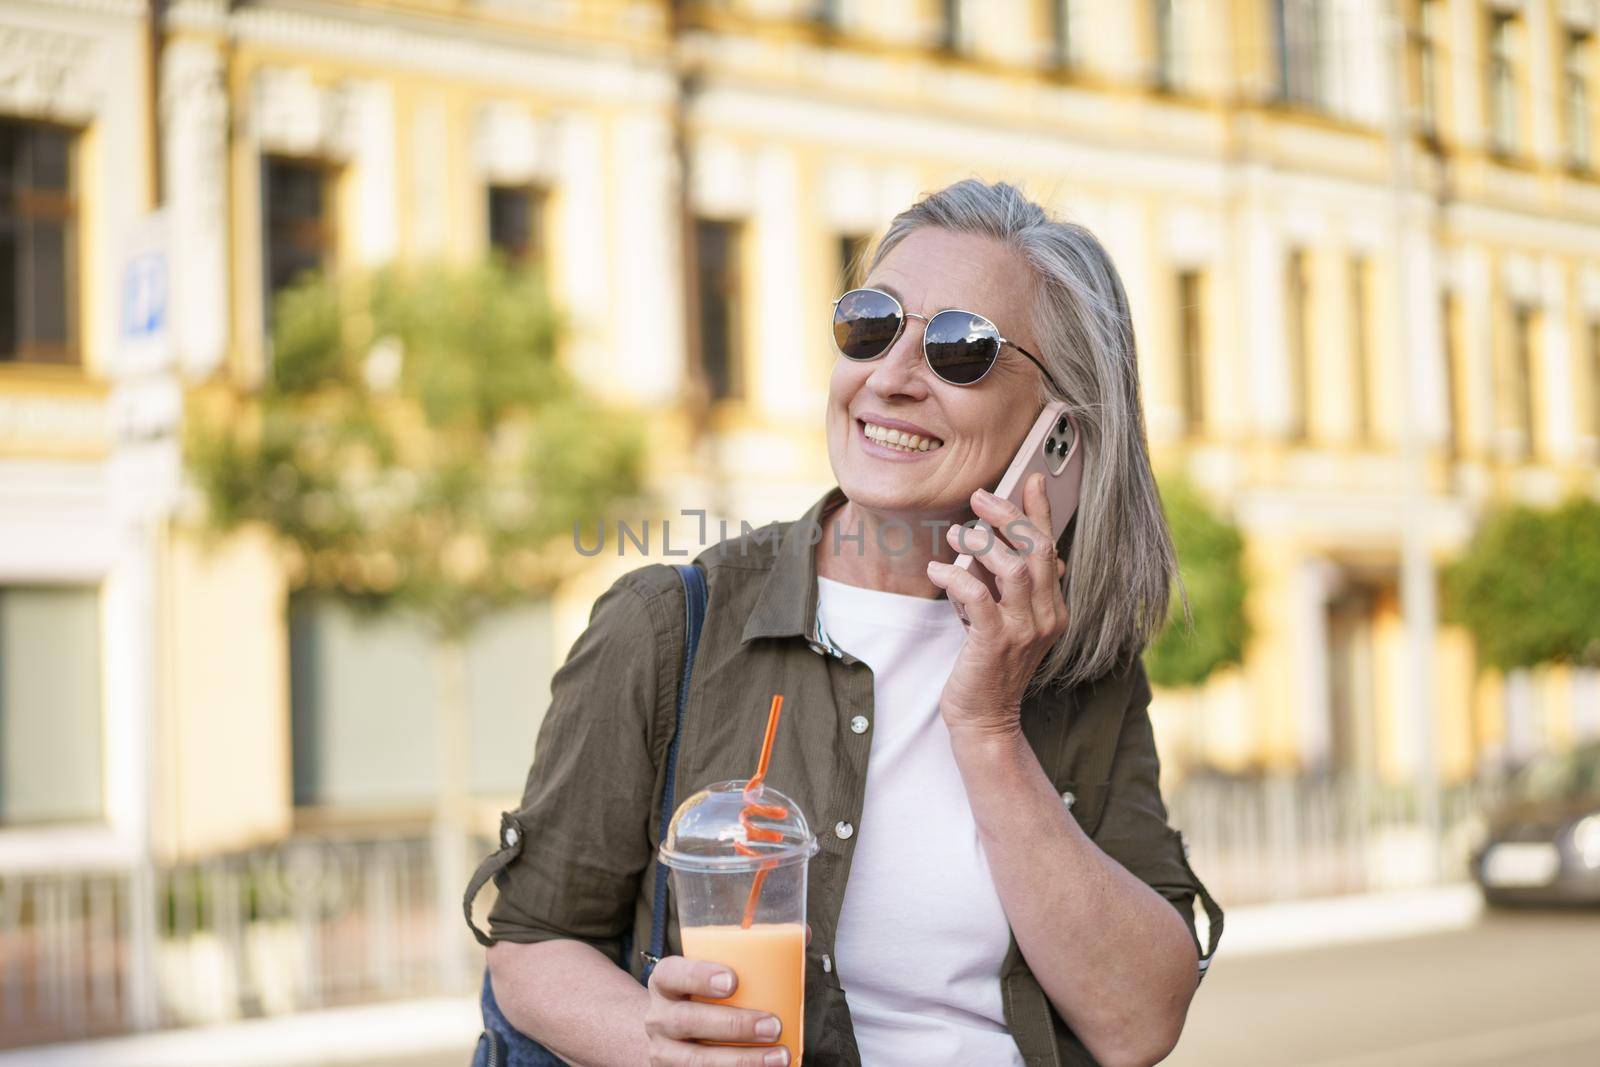 Answering phone call happy mature woman talking on the phone enjoying free time after work or traveling having juice in plastic cup on the go in city background. Enjoying life mature woman.